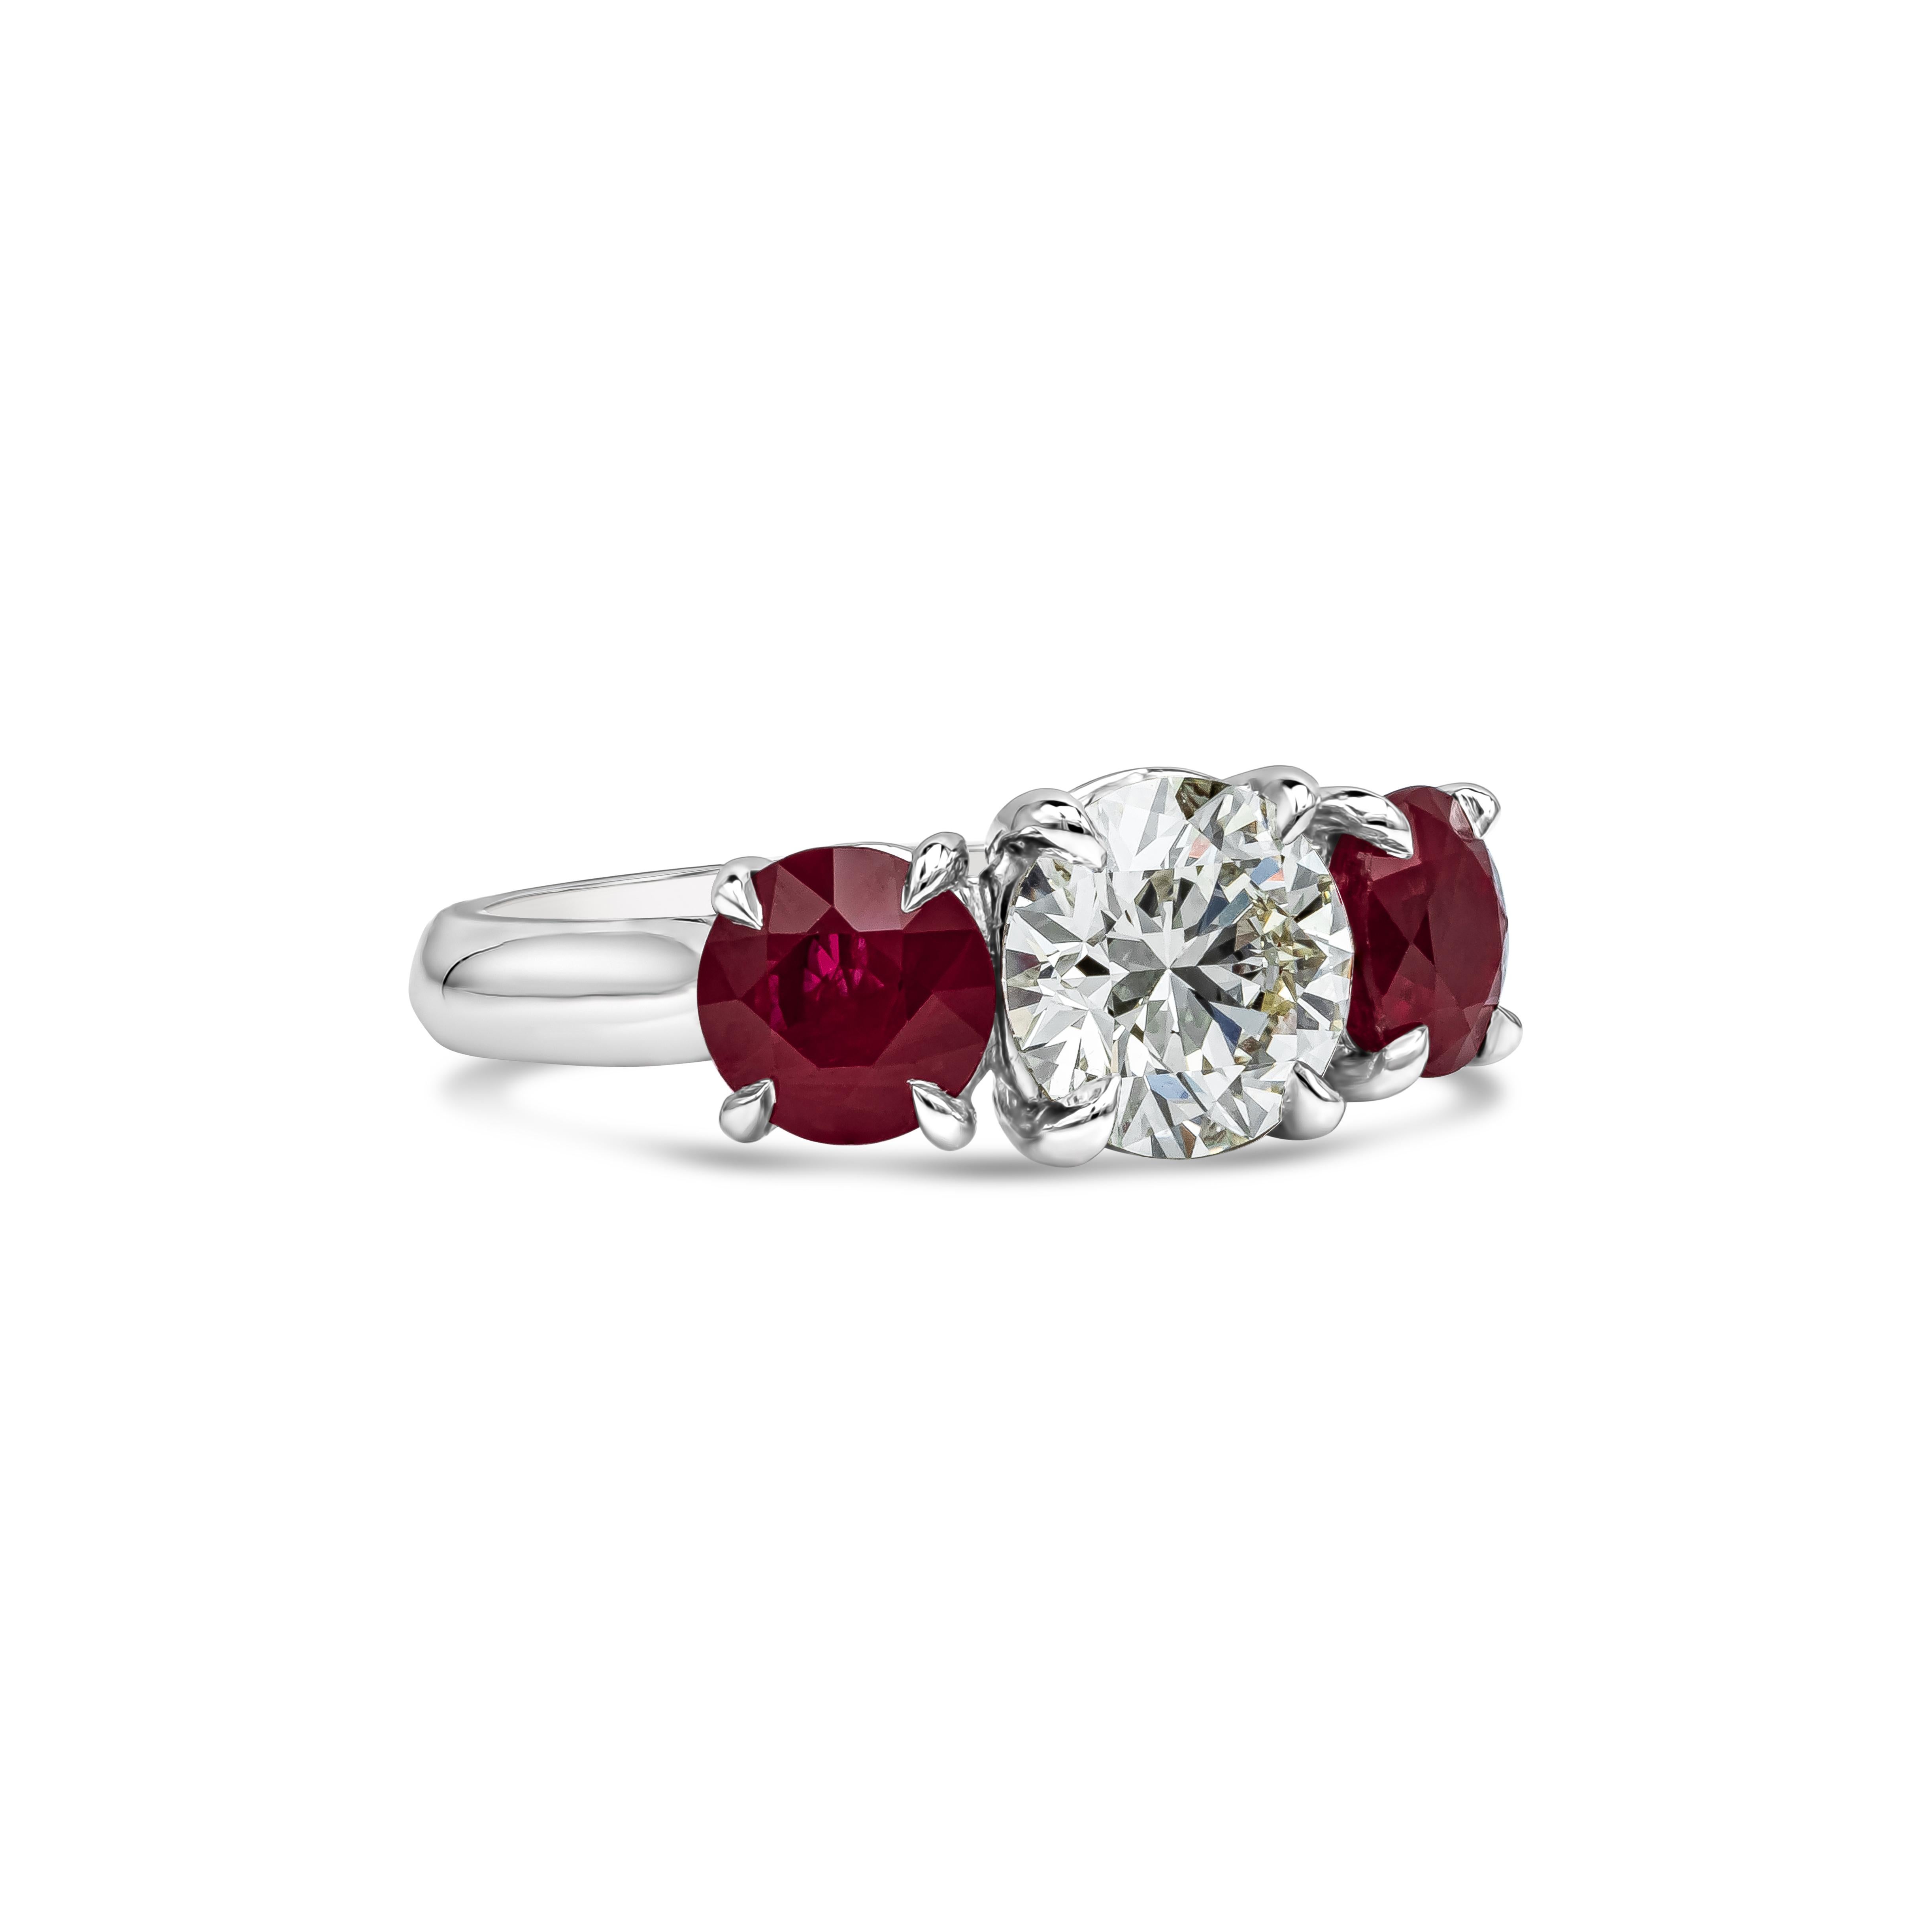 A sparkling 1.50 carats round diamond takes center stage in this ruby and diamond engagement ring. Accenting the center stone are two color-rich rubies set in a four  prongs basket setting and made in platinum. Rubies weigh 2.27 carats total.